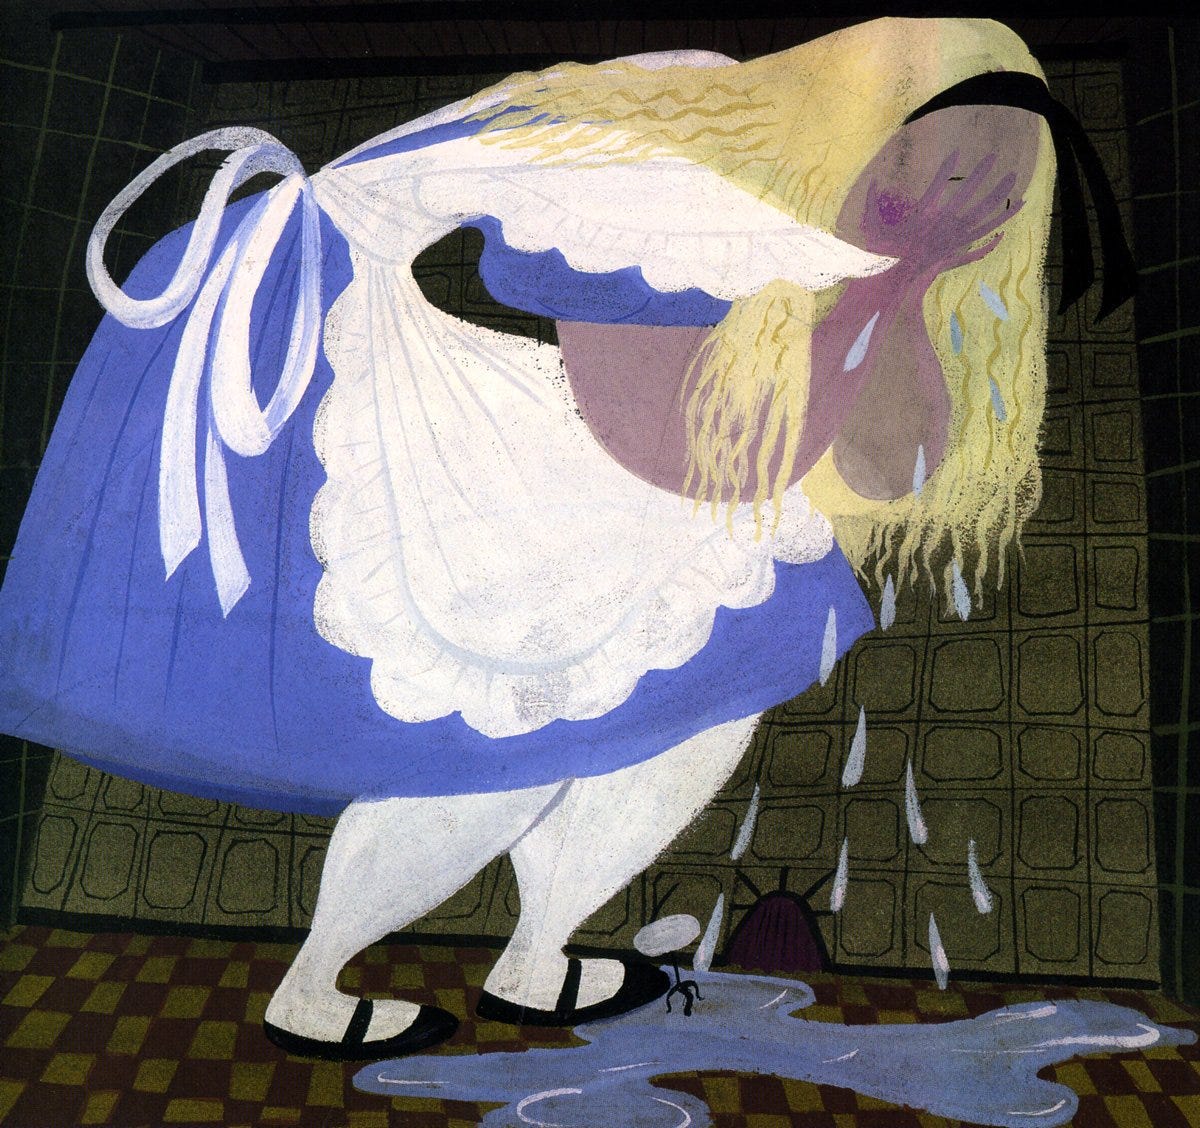 Ronnie del Carmen on X: "Mary Blair. One of my faves of Mary's Alice  concept art where she cries and creates an ocean of tears. Alice in  Wonderland (1951) #Animation https://t.co/mvchAH6fVS" /